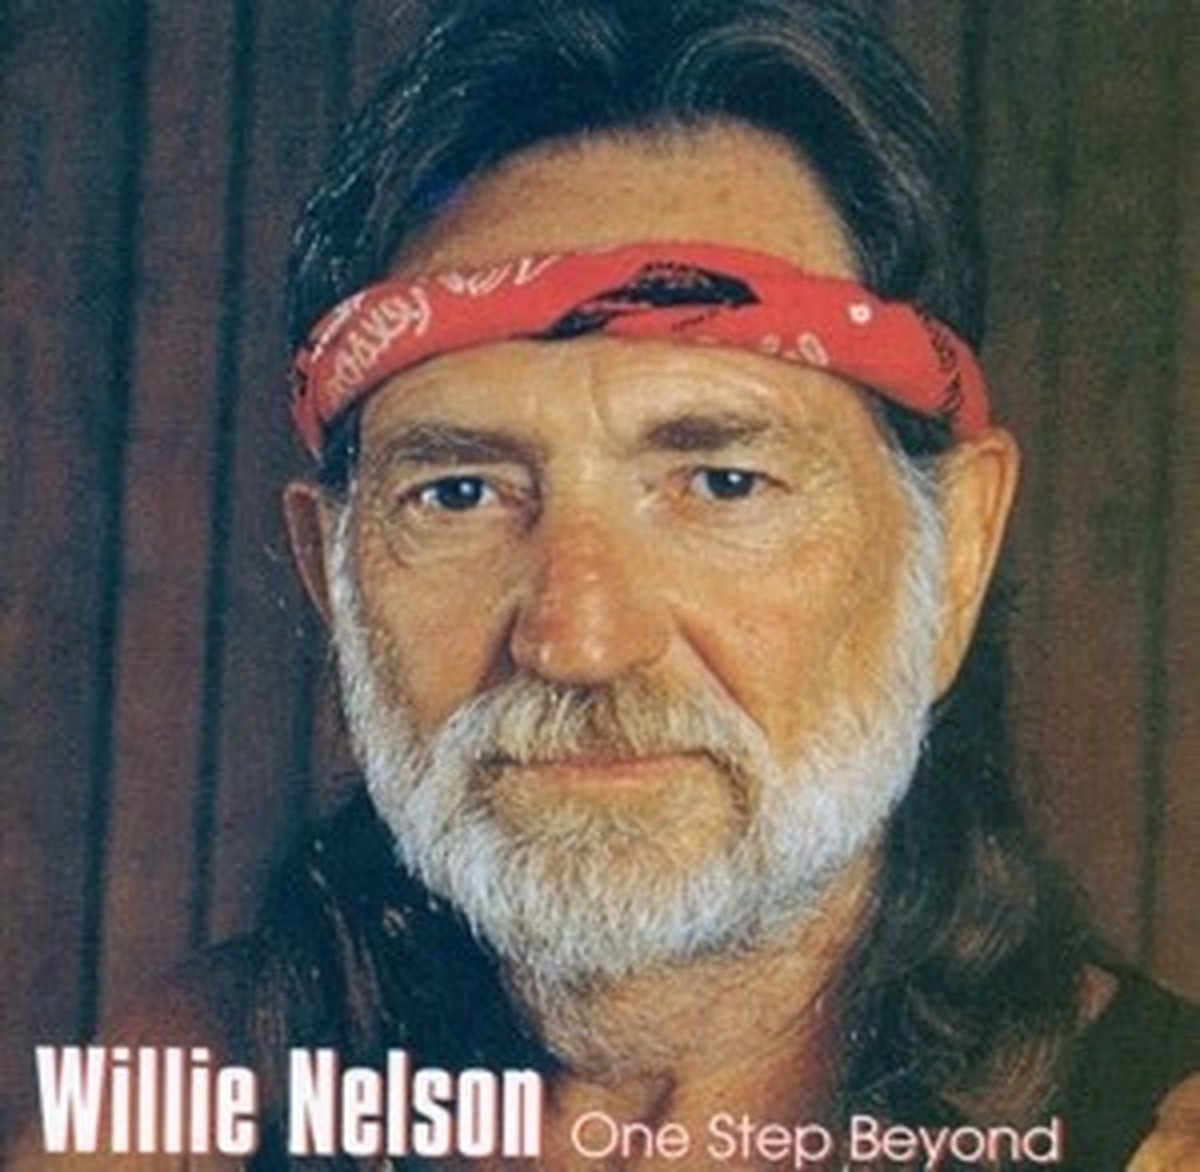 Willie Nelson - One Step Beyond (CD) - Willie Nelson